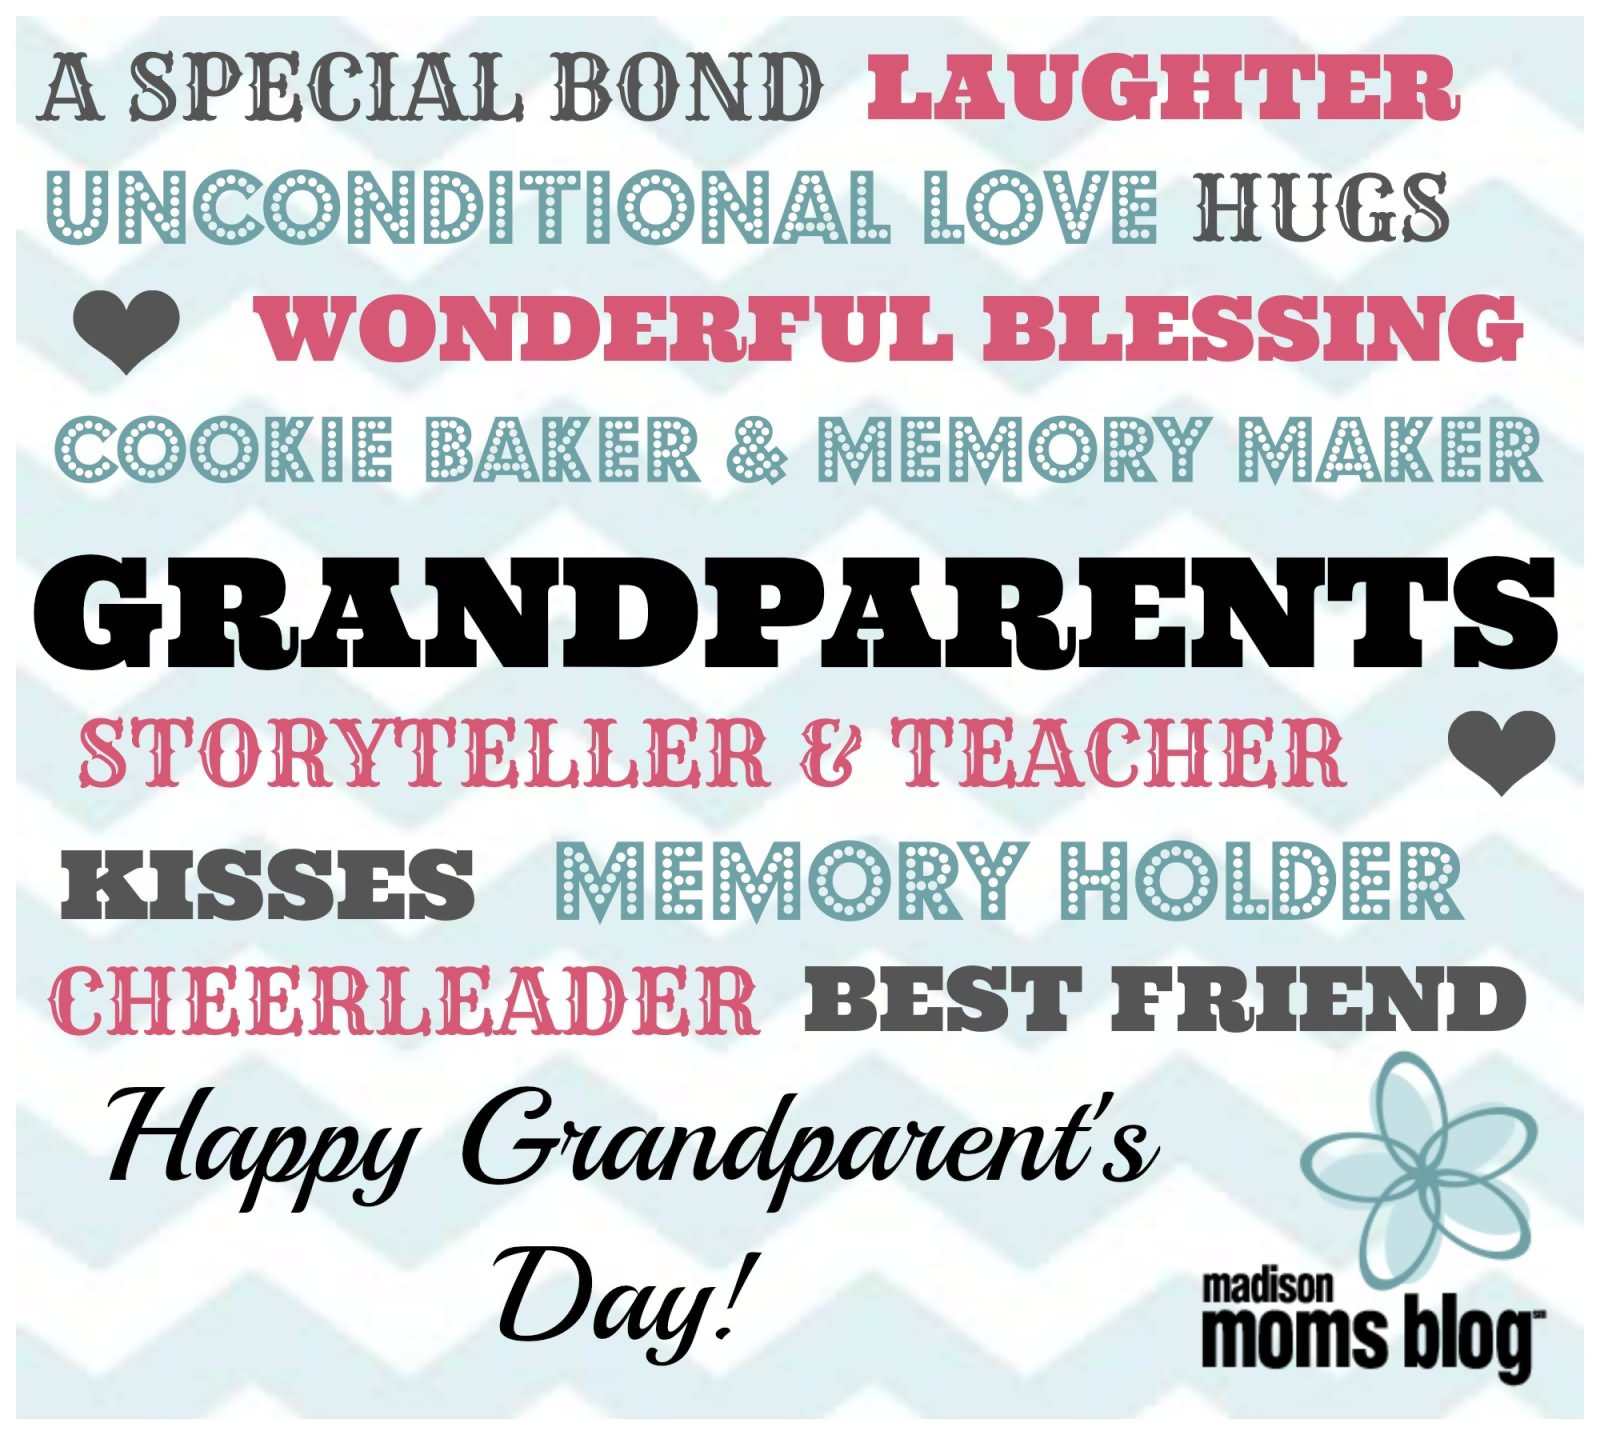 A Special Bond Laughter Unconditional Love Hugs Wonderful Blessings Happy Grandparents Day